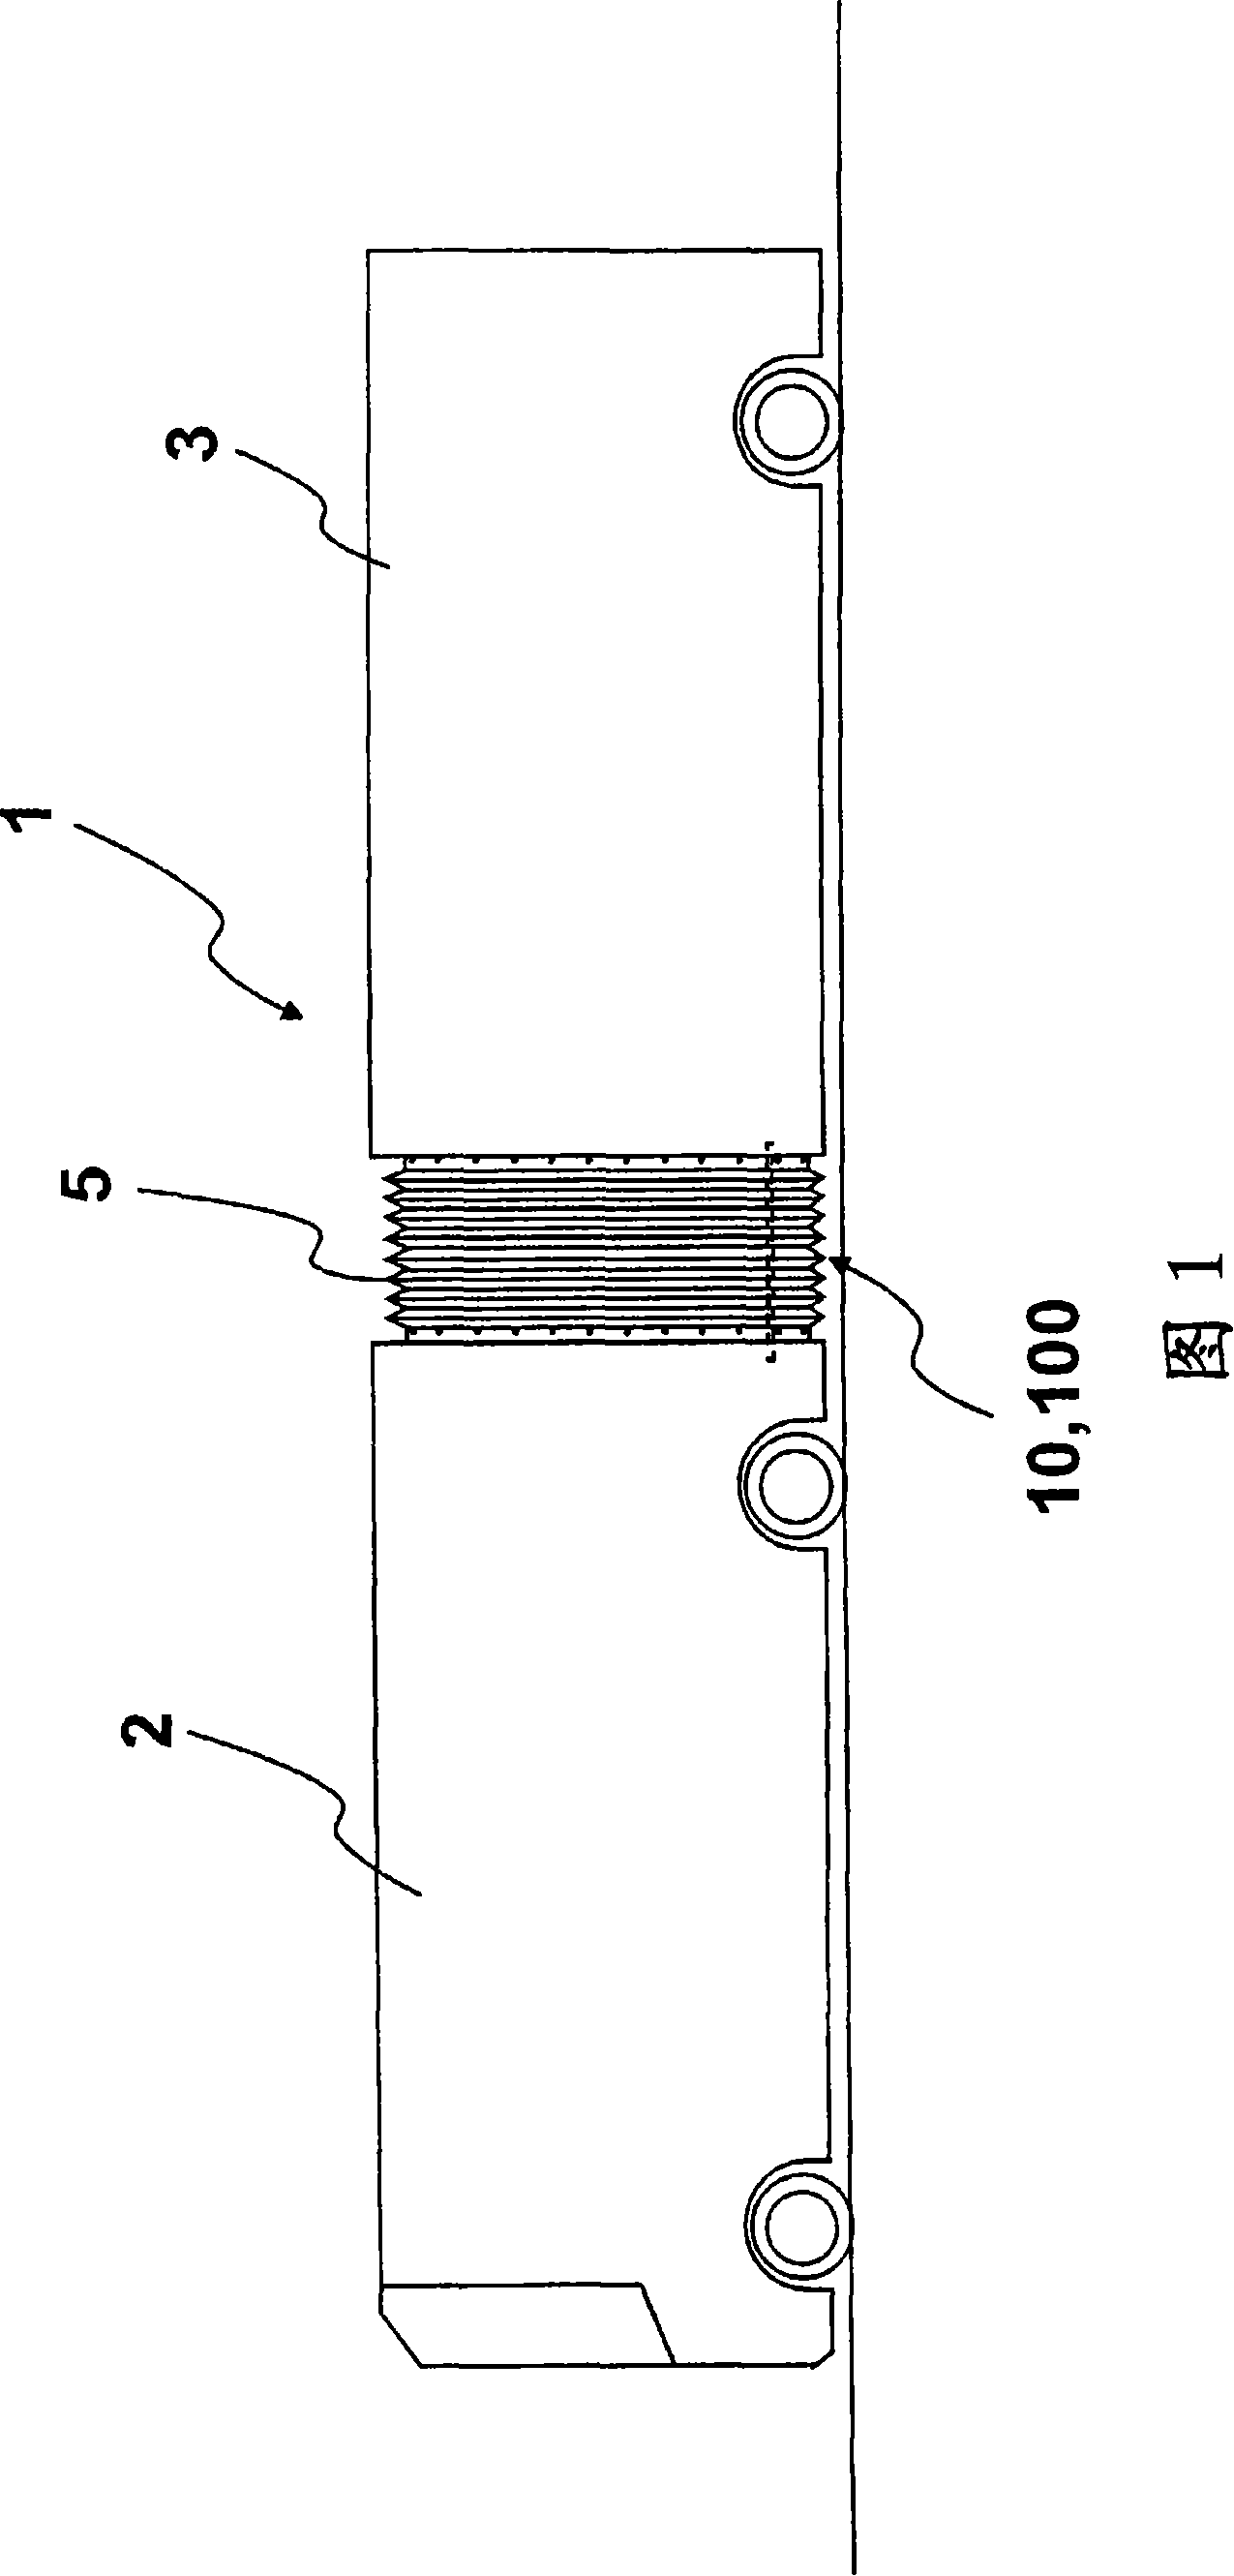 Coupling between two articulated vehicle parts, e.g. for an articulated vehicle